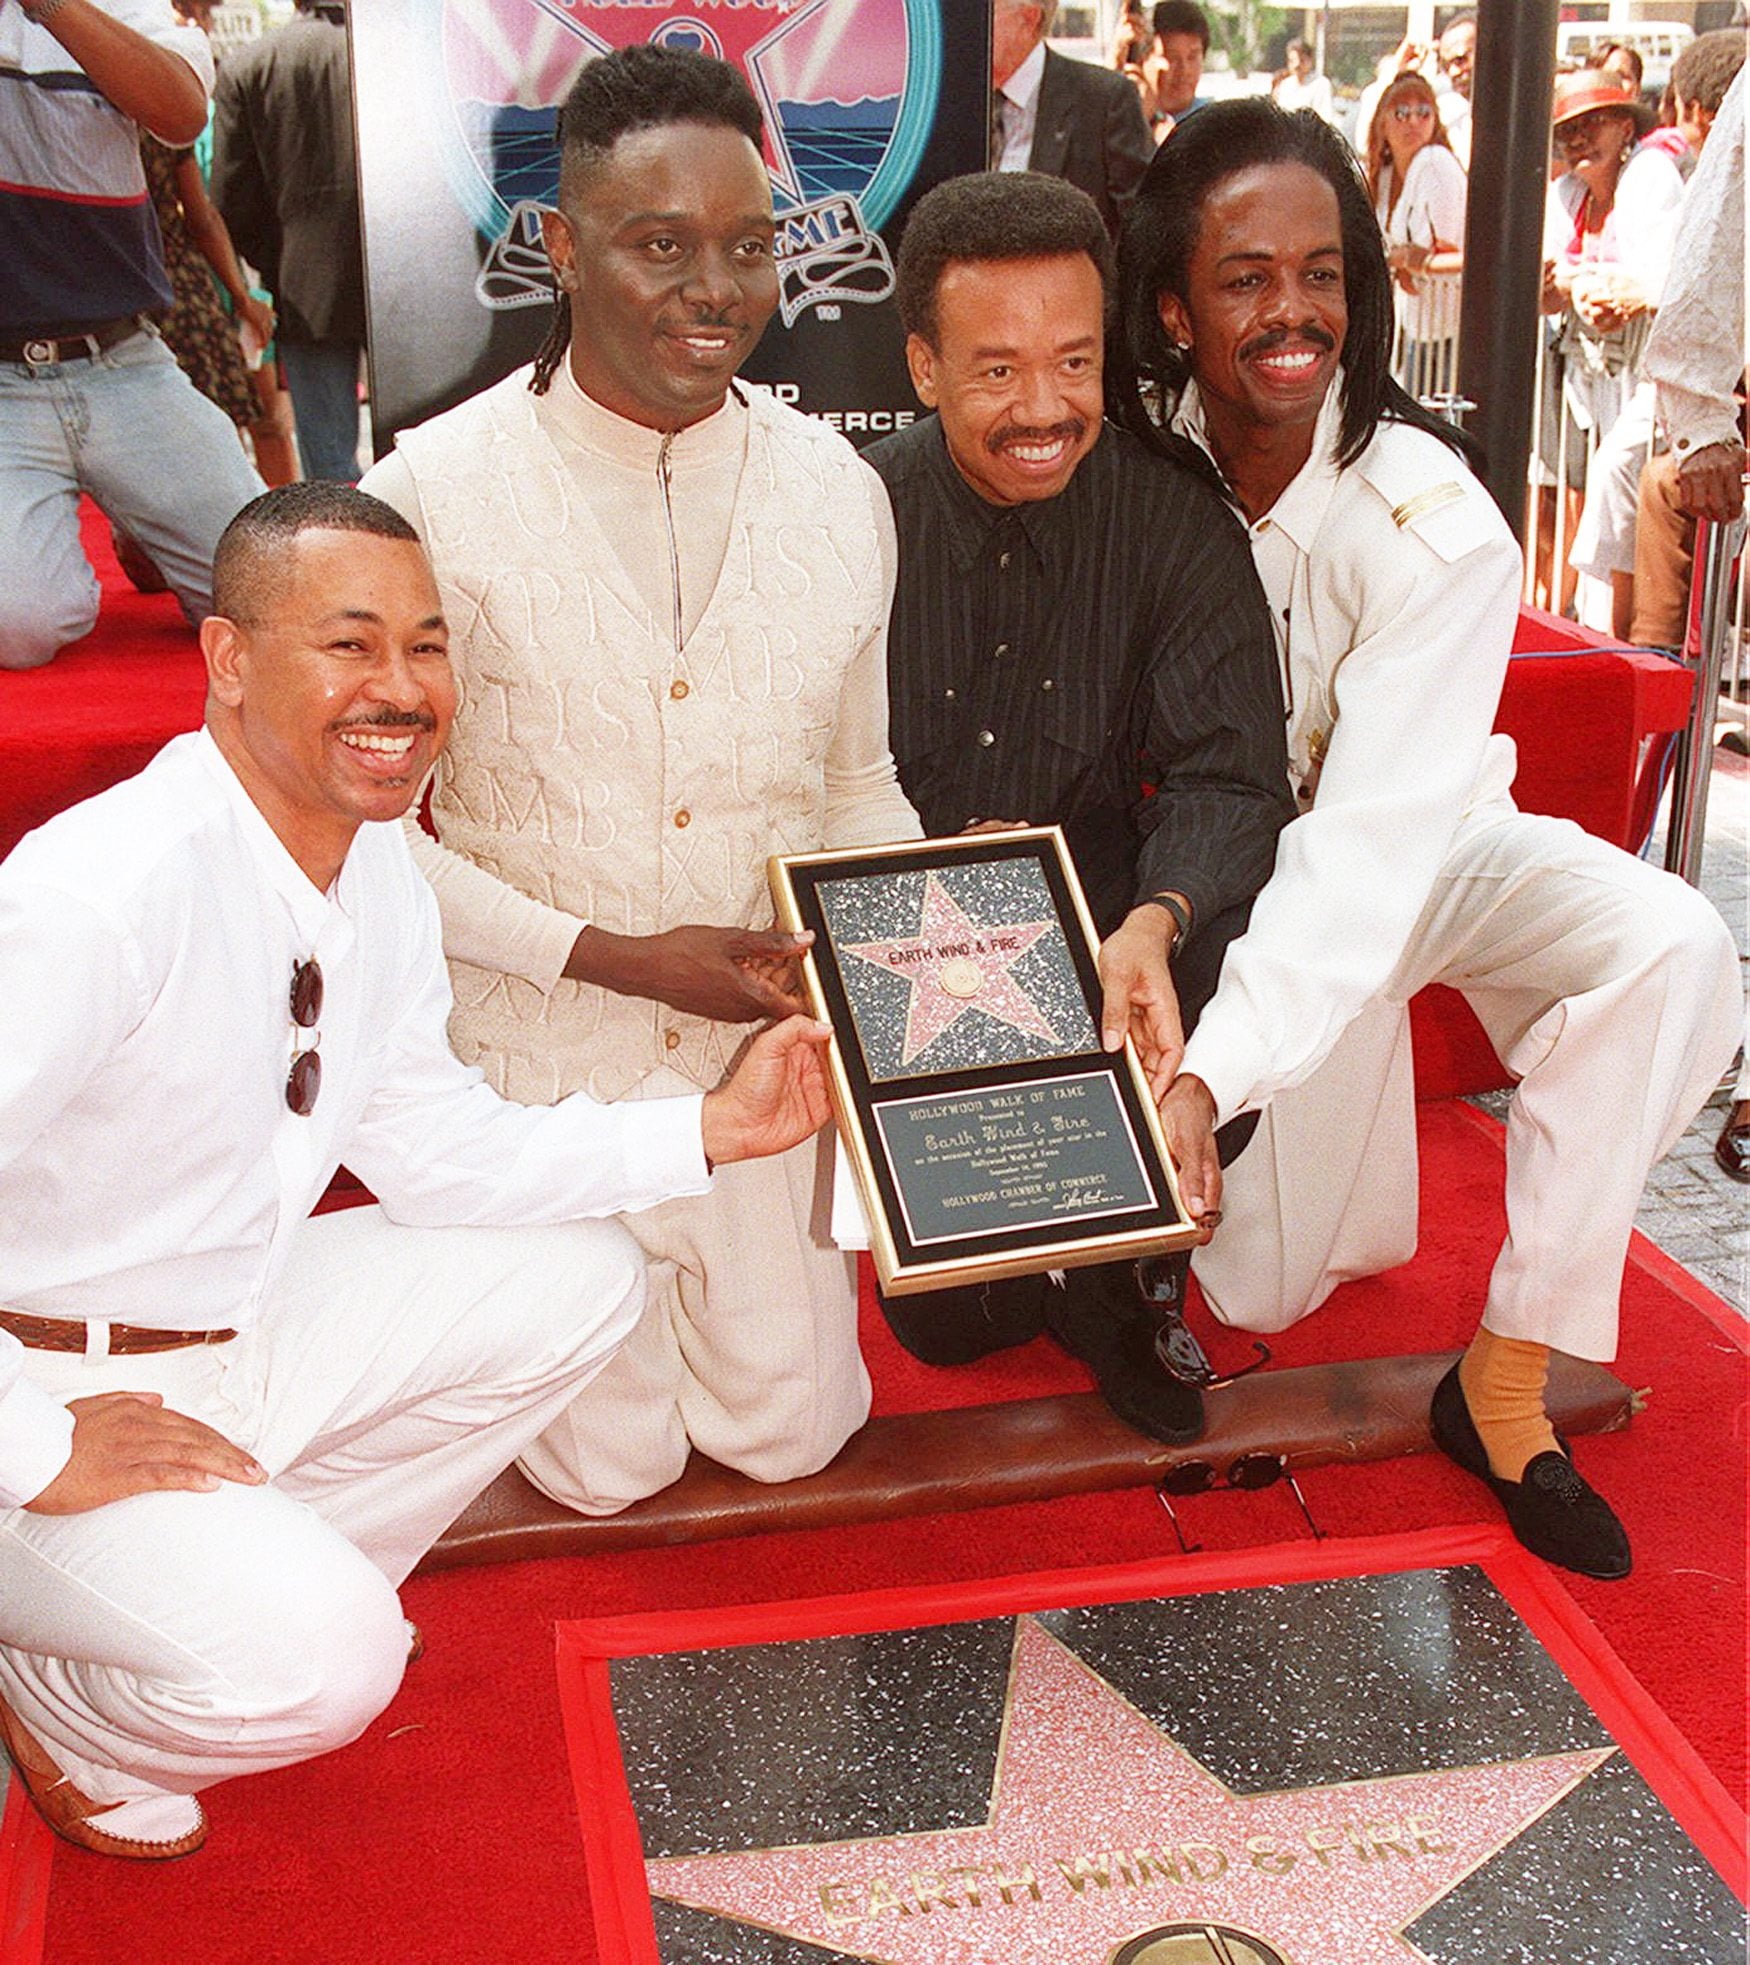 Ralph Johnson, from left,  Phillip Bailey, Maurice White and Verdine White, of Earth, Wind &amp; Fire, pose Sept. 14, 1995 in Los Angeles. Maurice White, the founder and leader of Earth, Wind &amp; Fire, died Wednesday at home in Los Angeles, said his brother, Verdine White. He was 74.